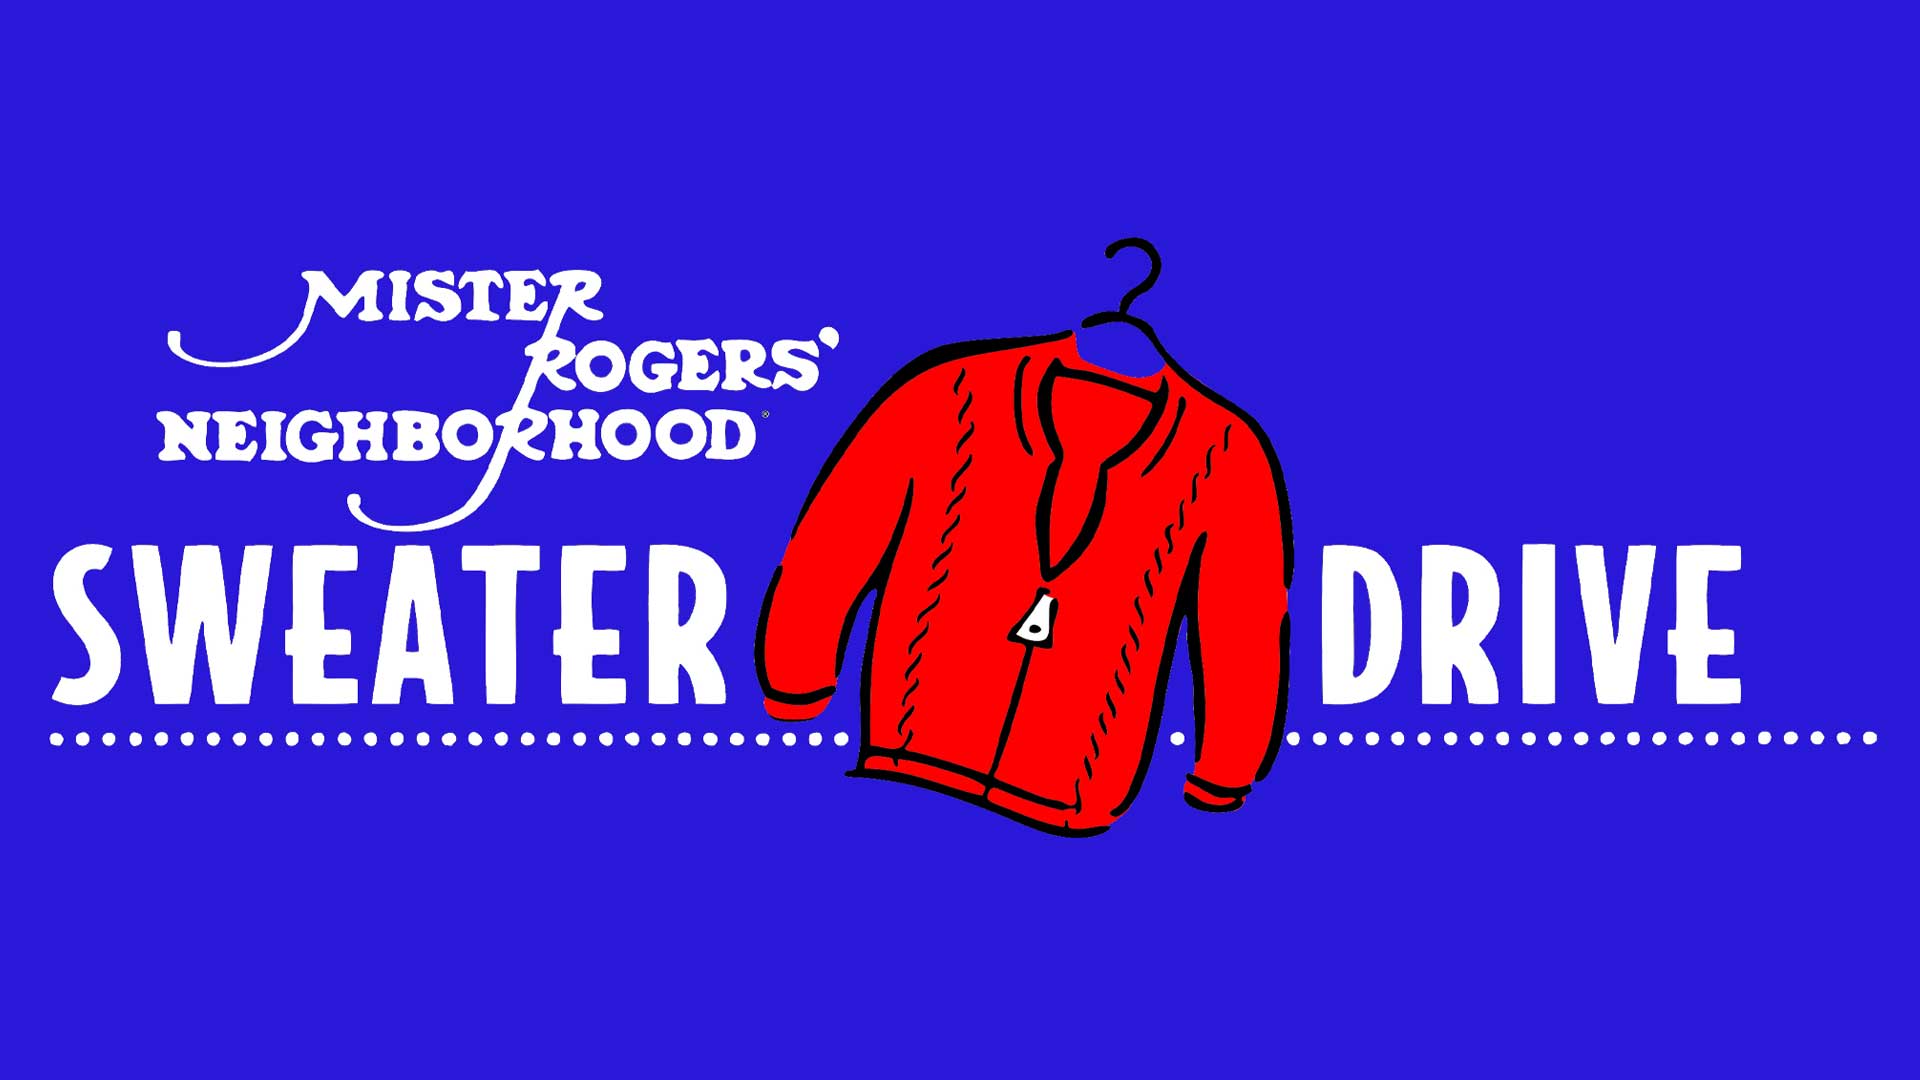 Donate new or gently used items during the Mr. Rogers' Neighborhood Sweater Drive.